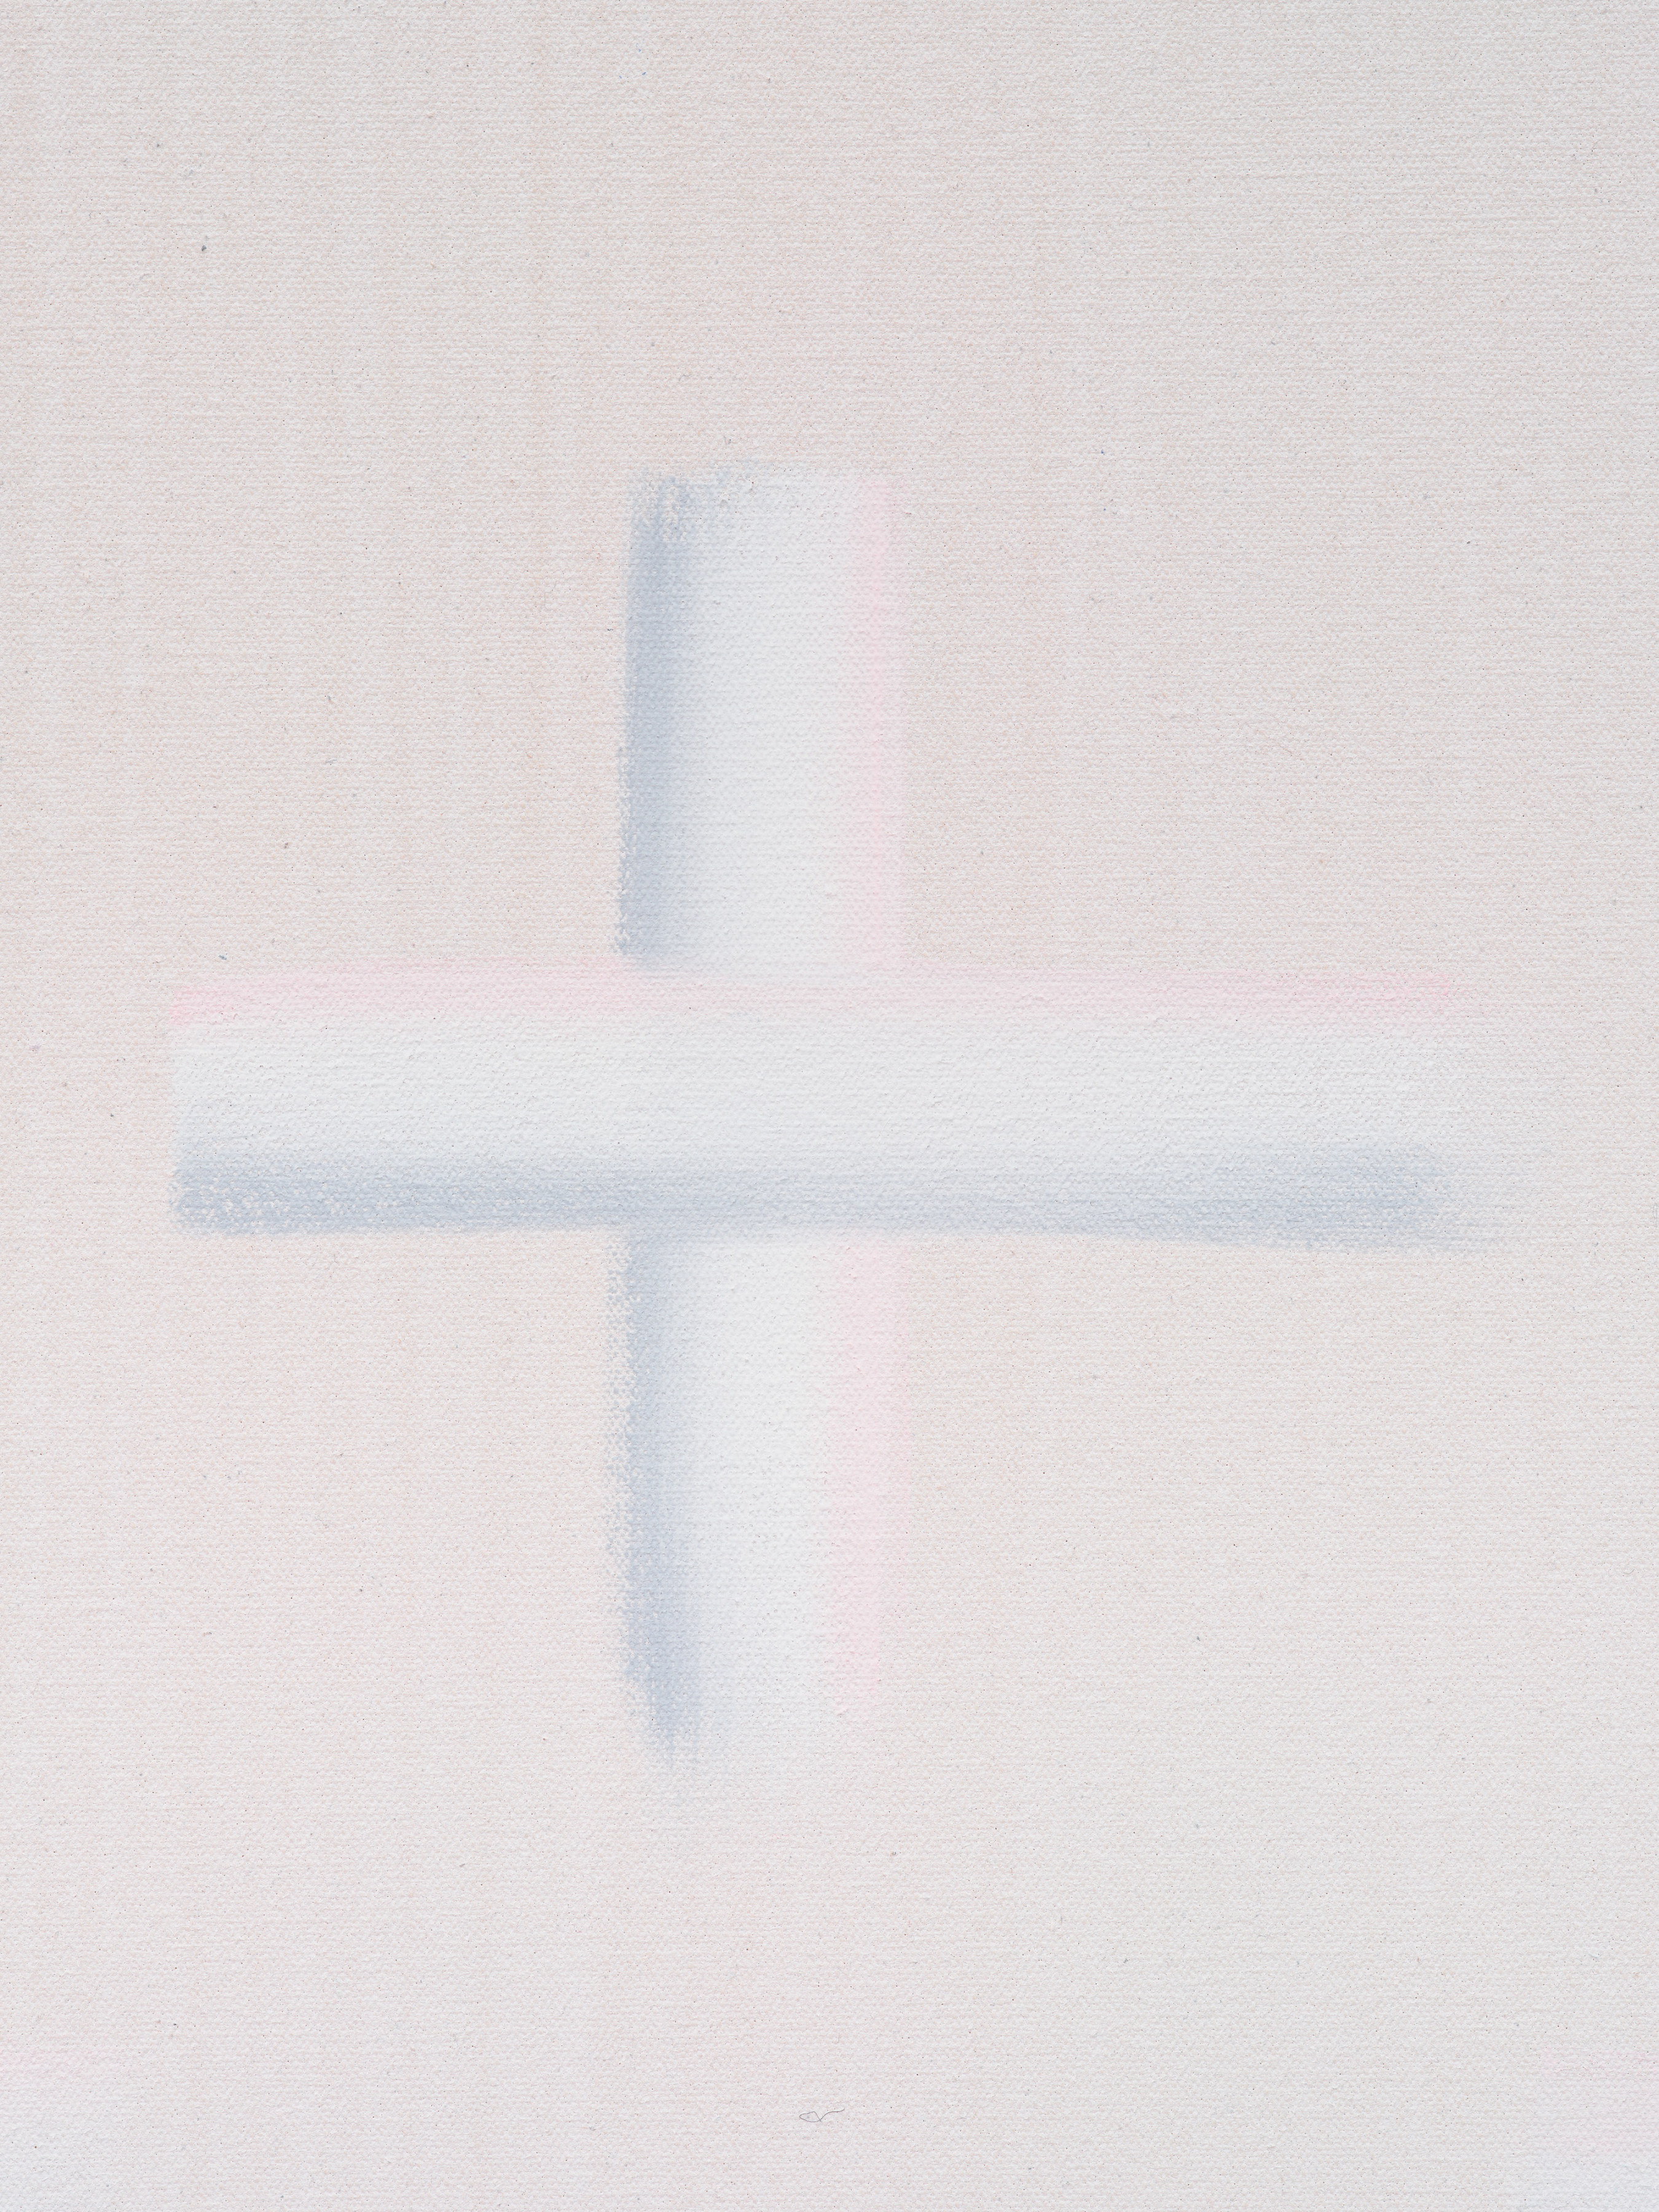  A detail of Wanda Koop’s “Sleepwalking” with a white cross in the center of a pink background 